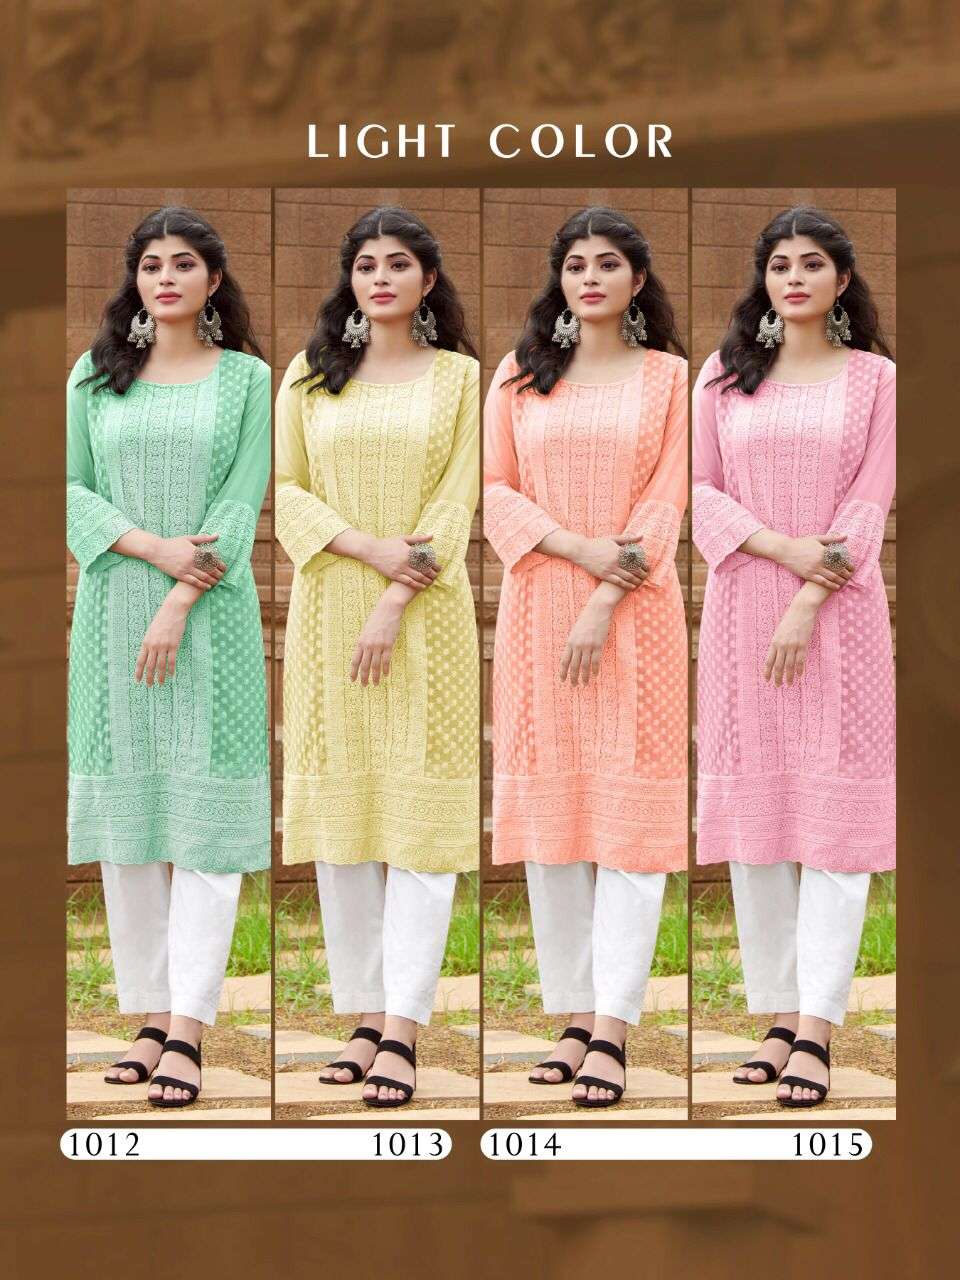 Buy MAHIRA 'S COMFORT Rayon Maternity Feeding Kurti A-Line: Perfect for  Pregnancy Easy Access for Breastfeeding Kurti Both Side Zip Invisible Zip  Opening Rayon Kurti (S_Bottle Green) at Amazon.in